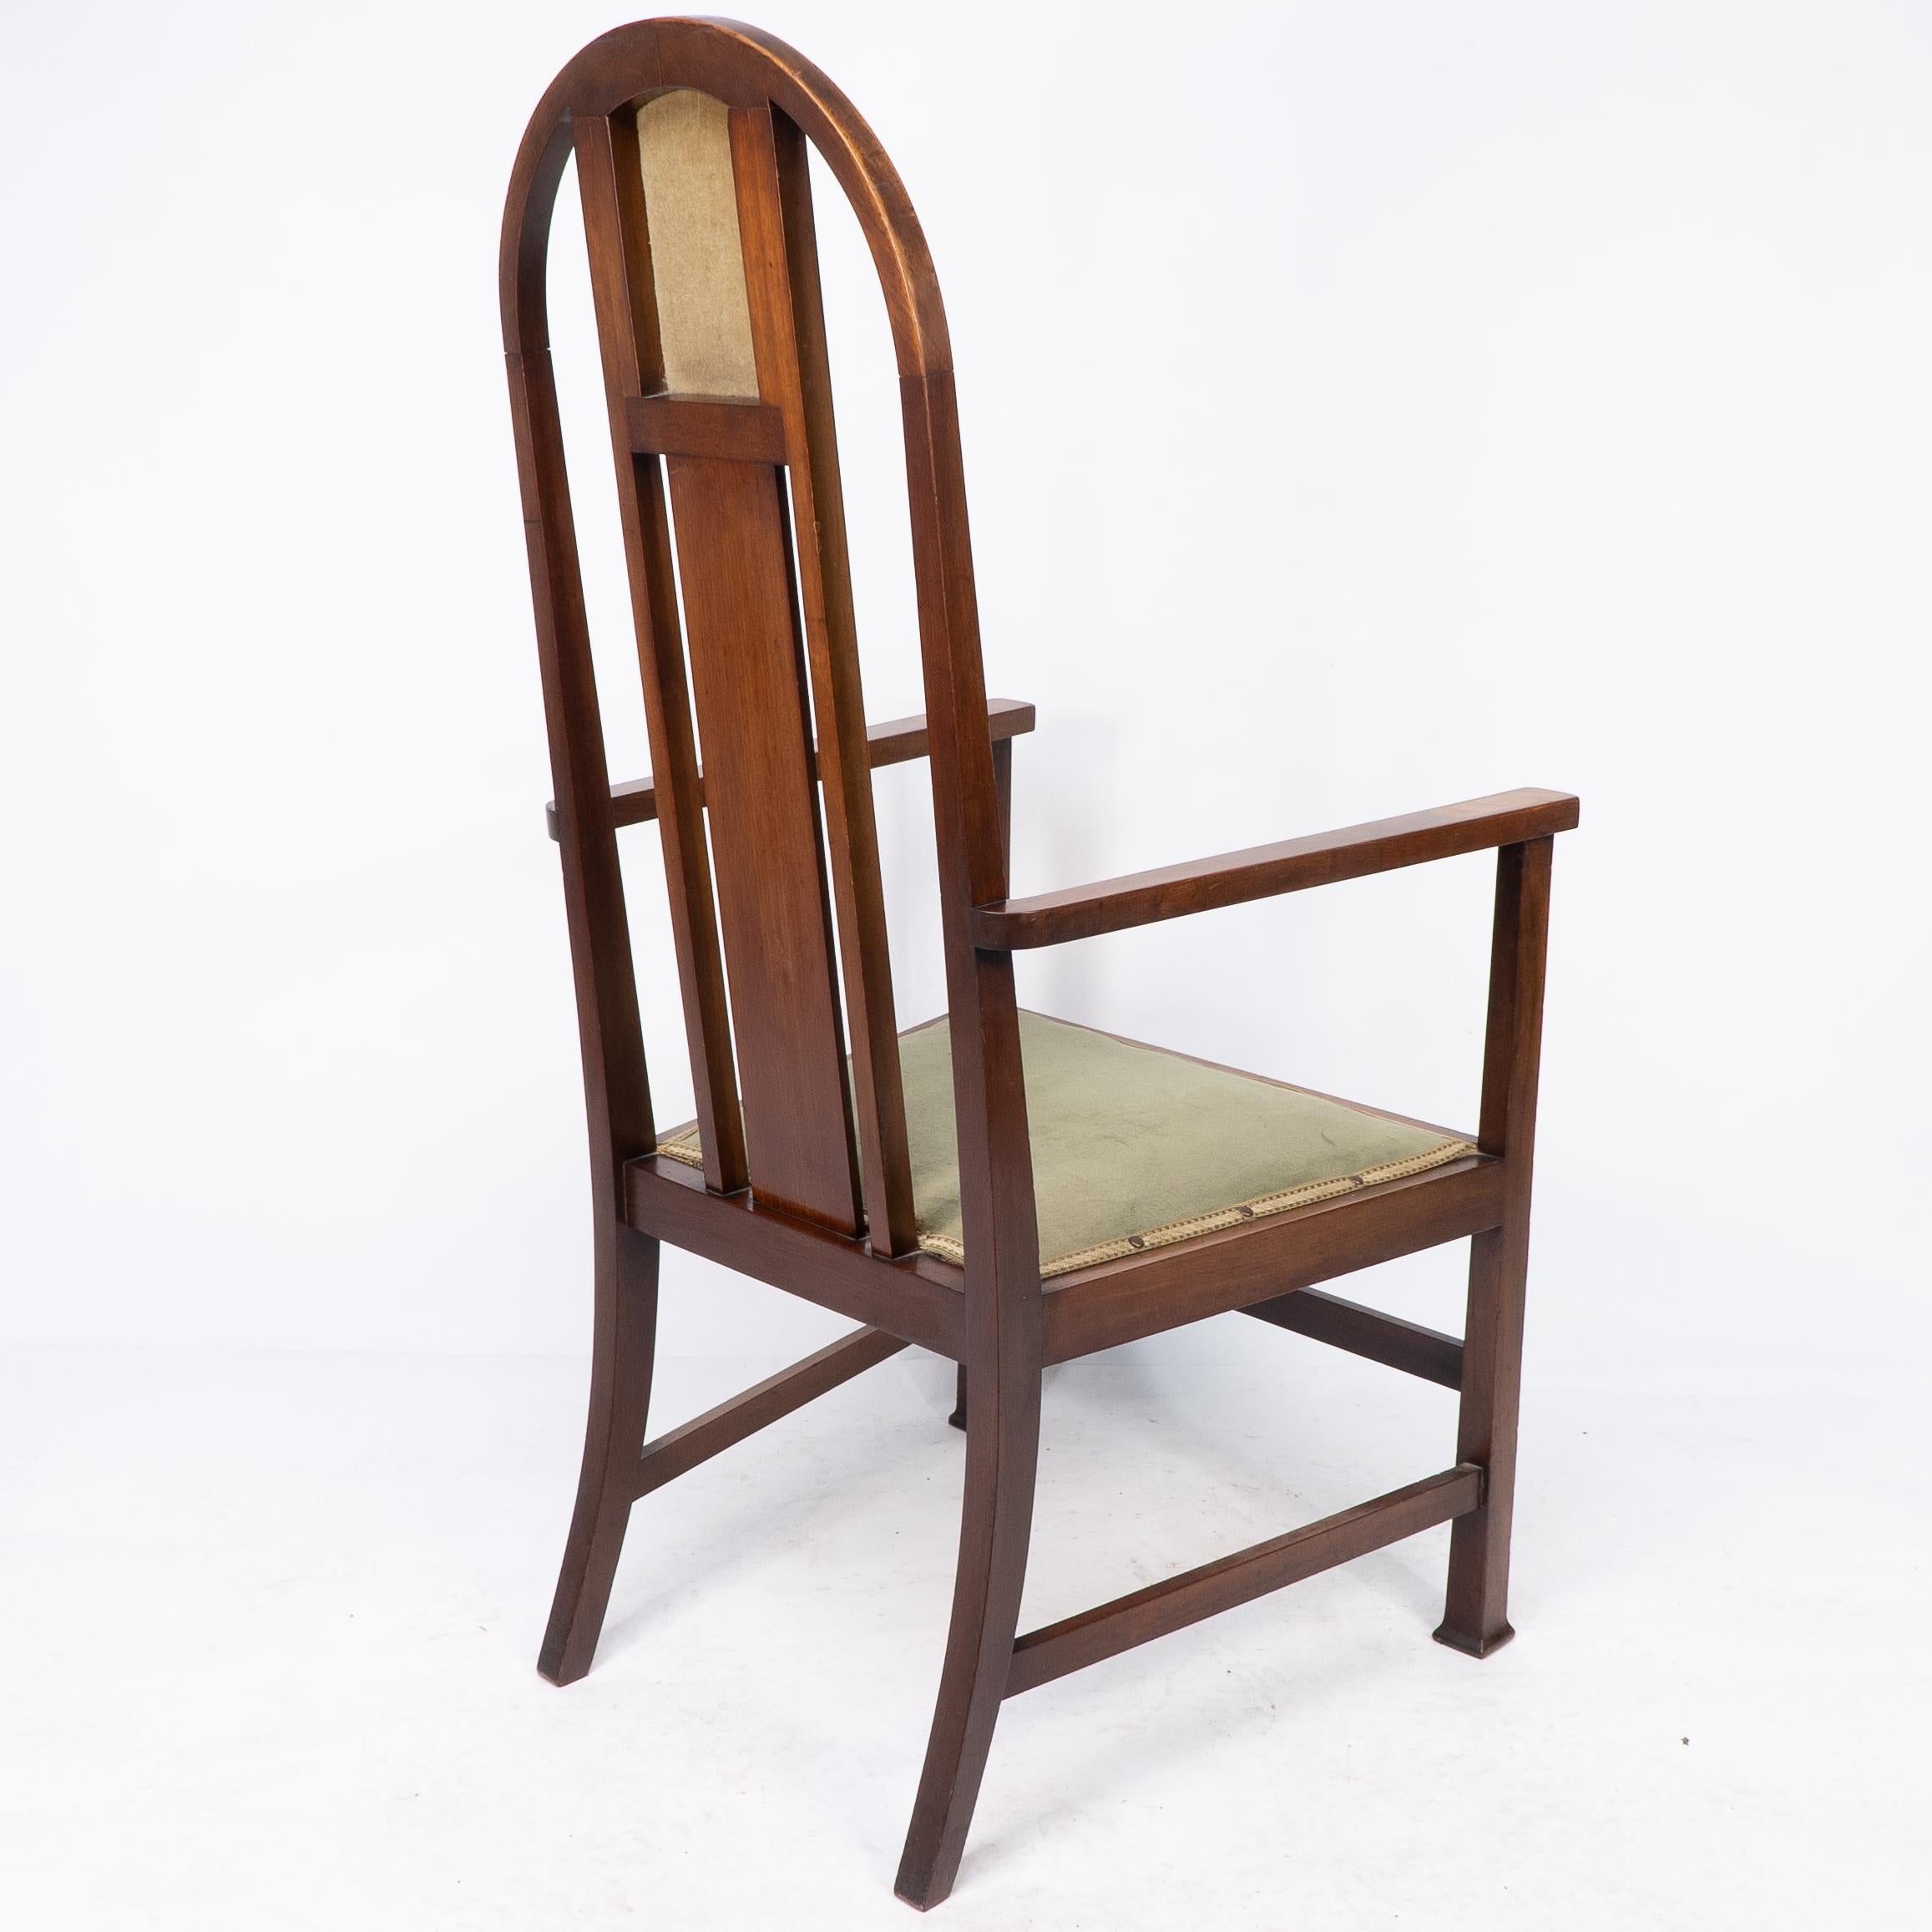 Liberty and Co attri, A Pair of Arts and Crafts mahogany and Inlaid Armchair For Sale 12